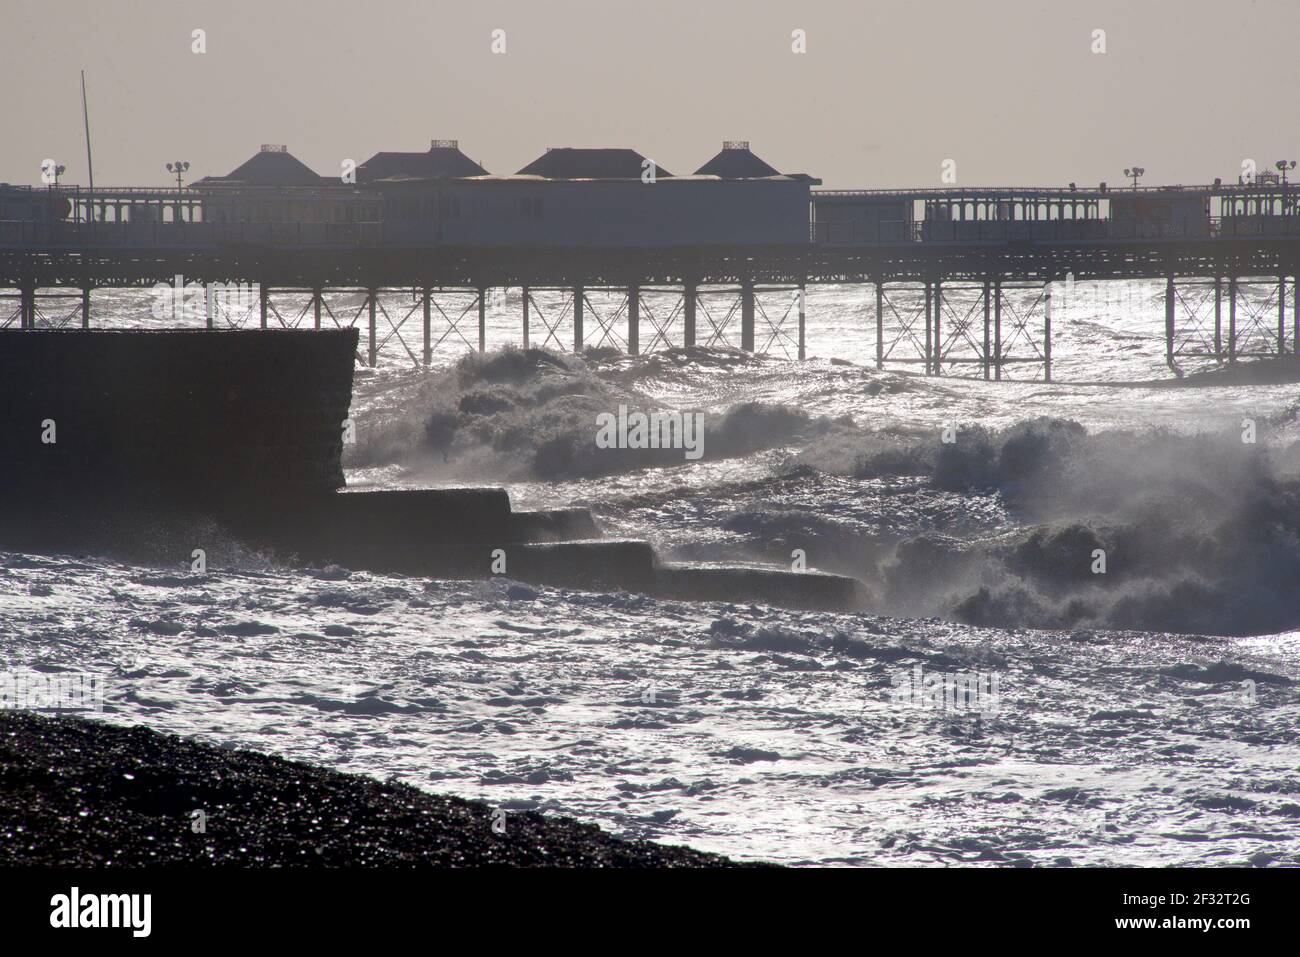 Looking east towards the Palace Pier, Brighton. Silhouette shapes and waves. Brighton beach on a stormy morning. East Sussex, England, UK. Stock Photo